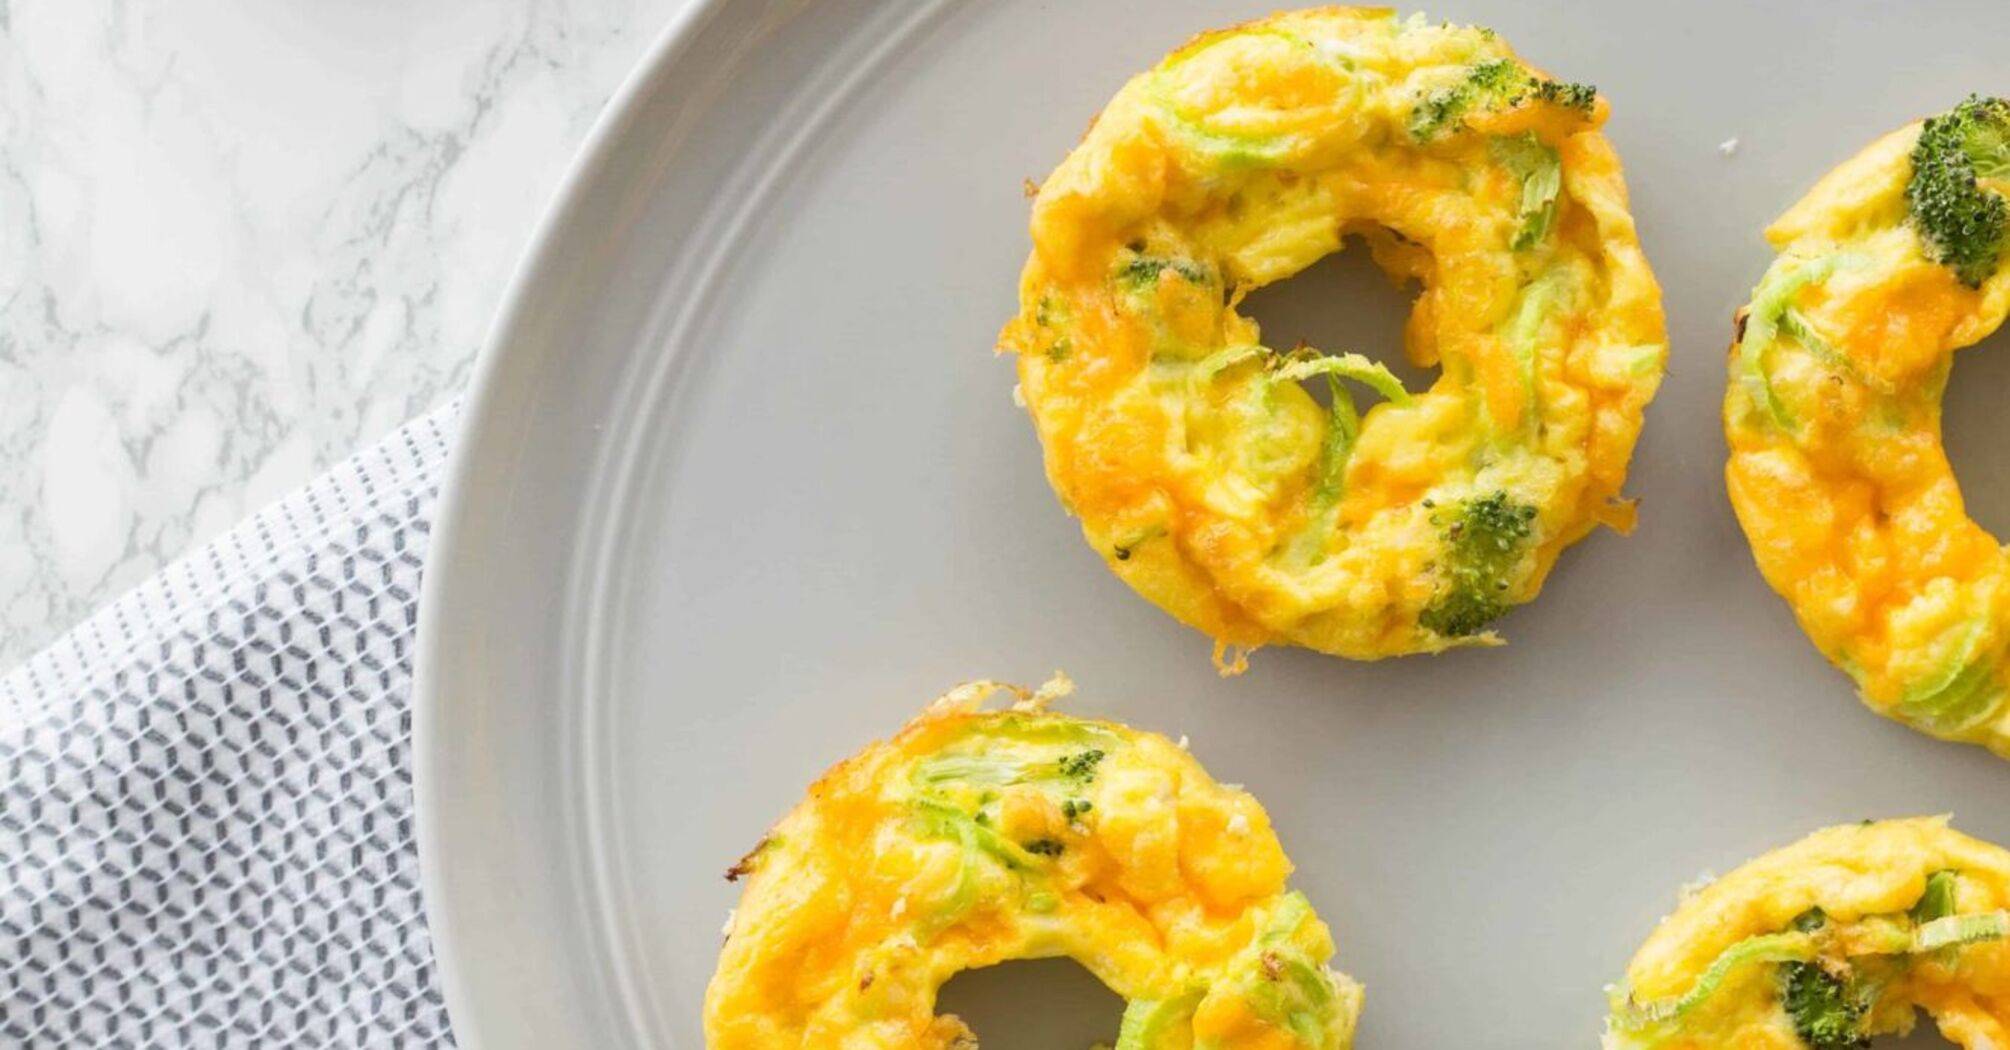 How to cook broccoli deliciously: an idea for hearty and healthy muffins